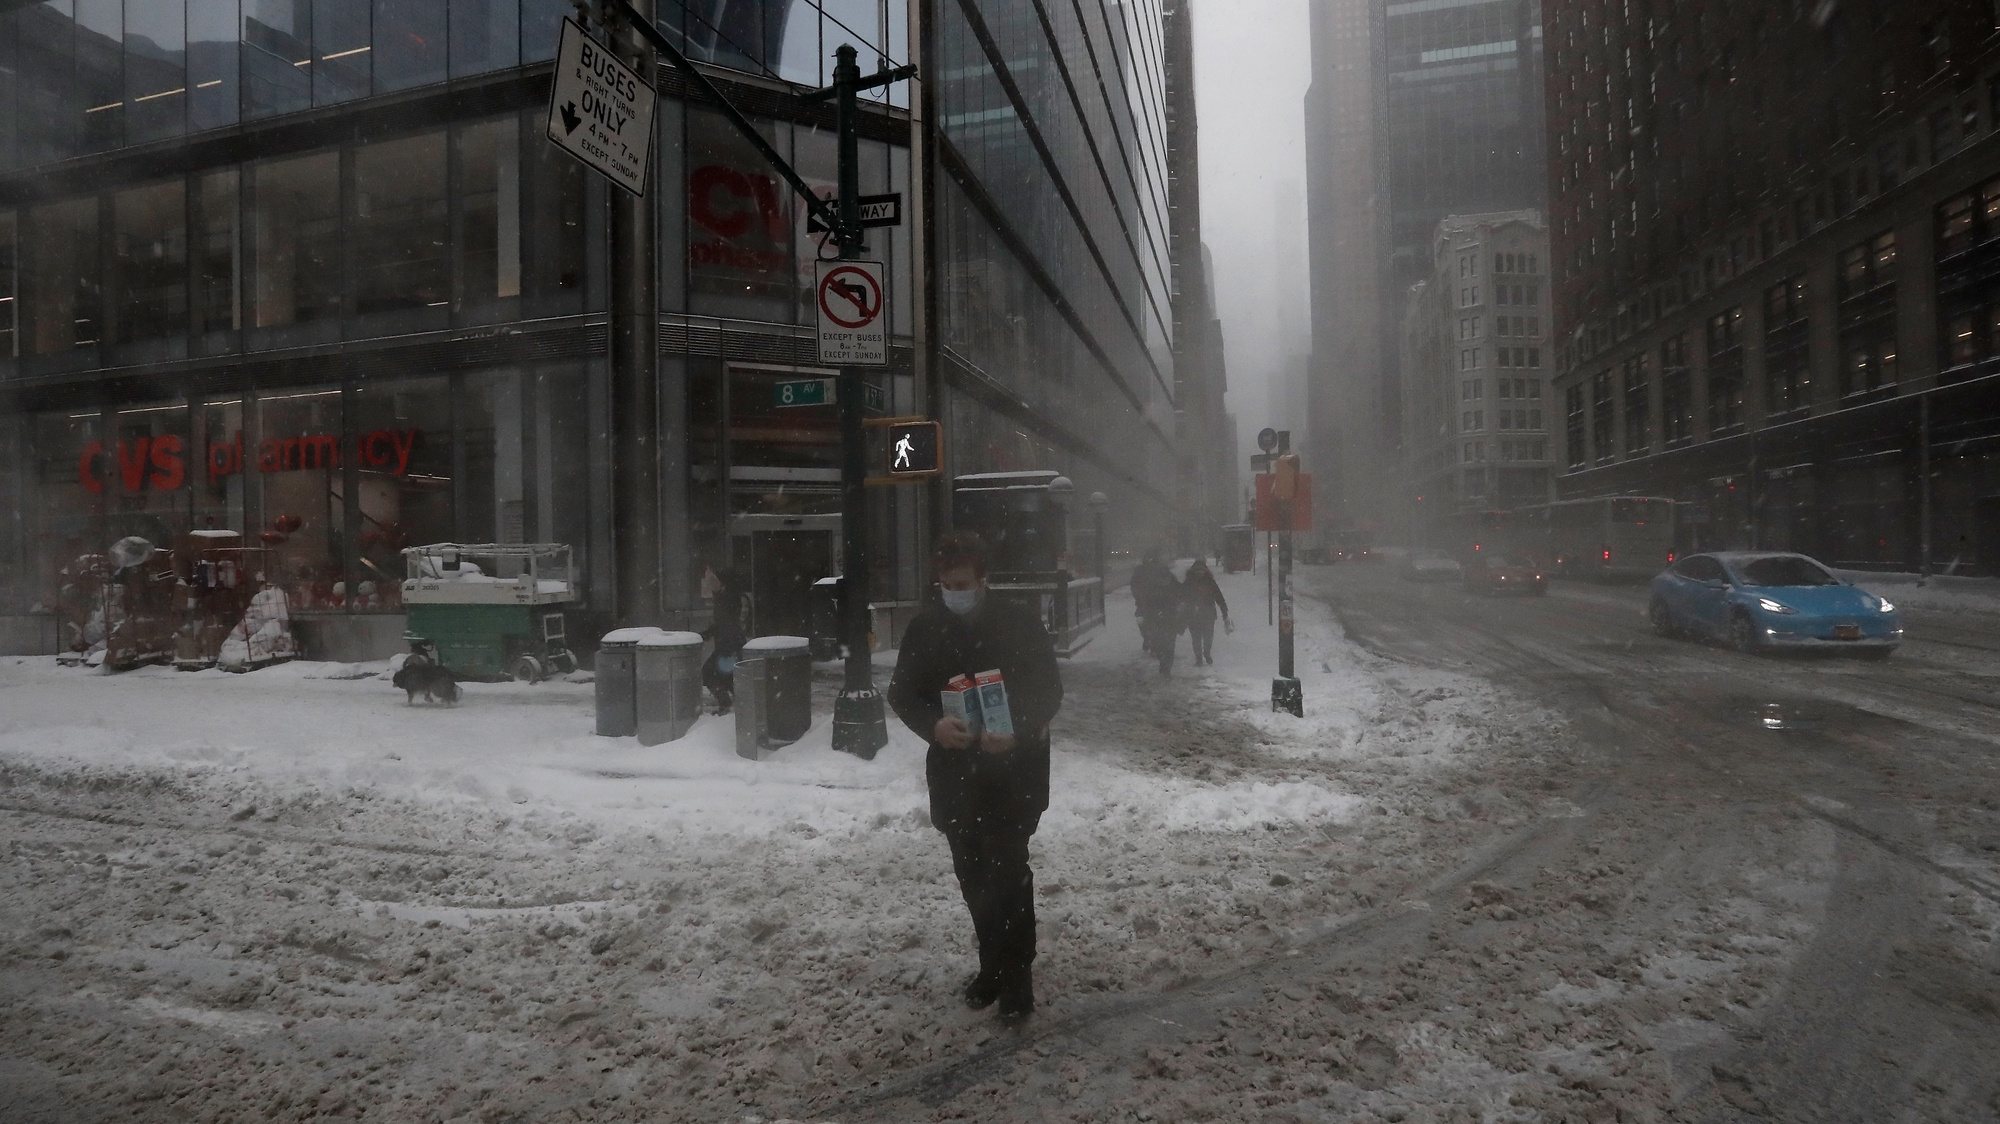 epa09717090 A man carries containers of milk across Eighth Avenue in New York, New York, USA, 29 January 2022. The large storm is hitting a substantial portion of the East Coast of the United States, disrupting travel and some areas are forecast to receive up to 2 feet (61 centimeters) of snow.  EPA/Peter Foley